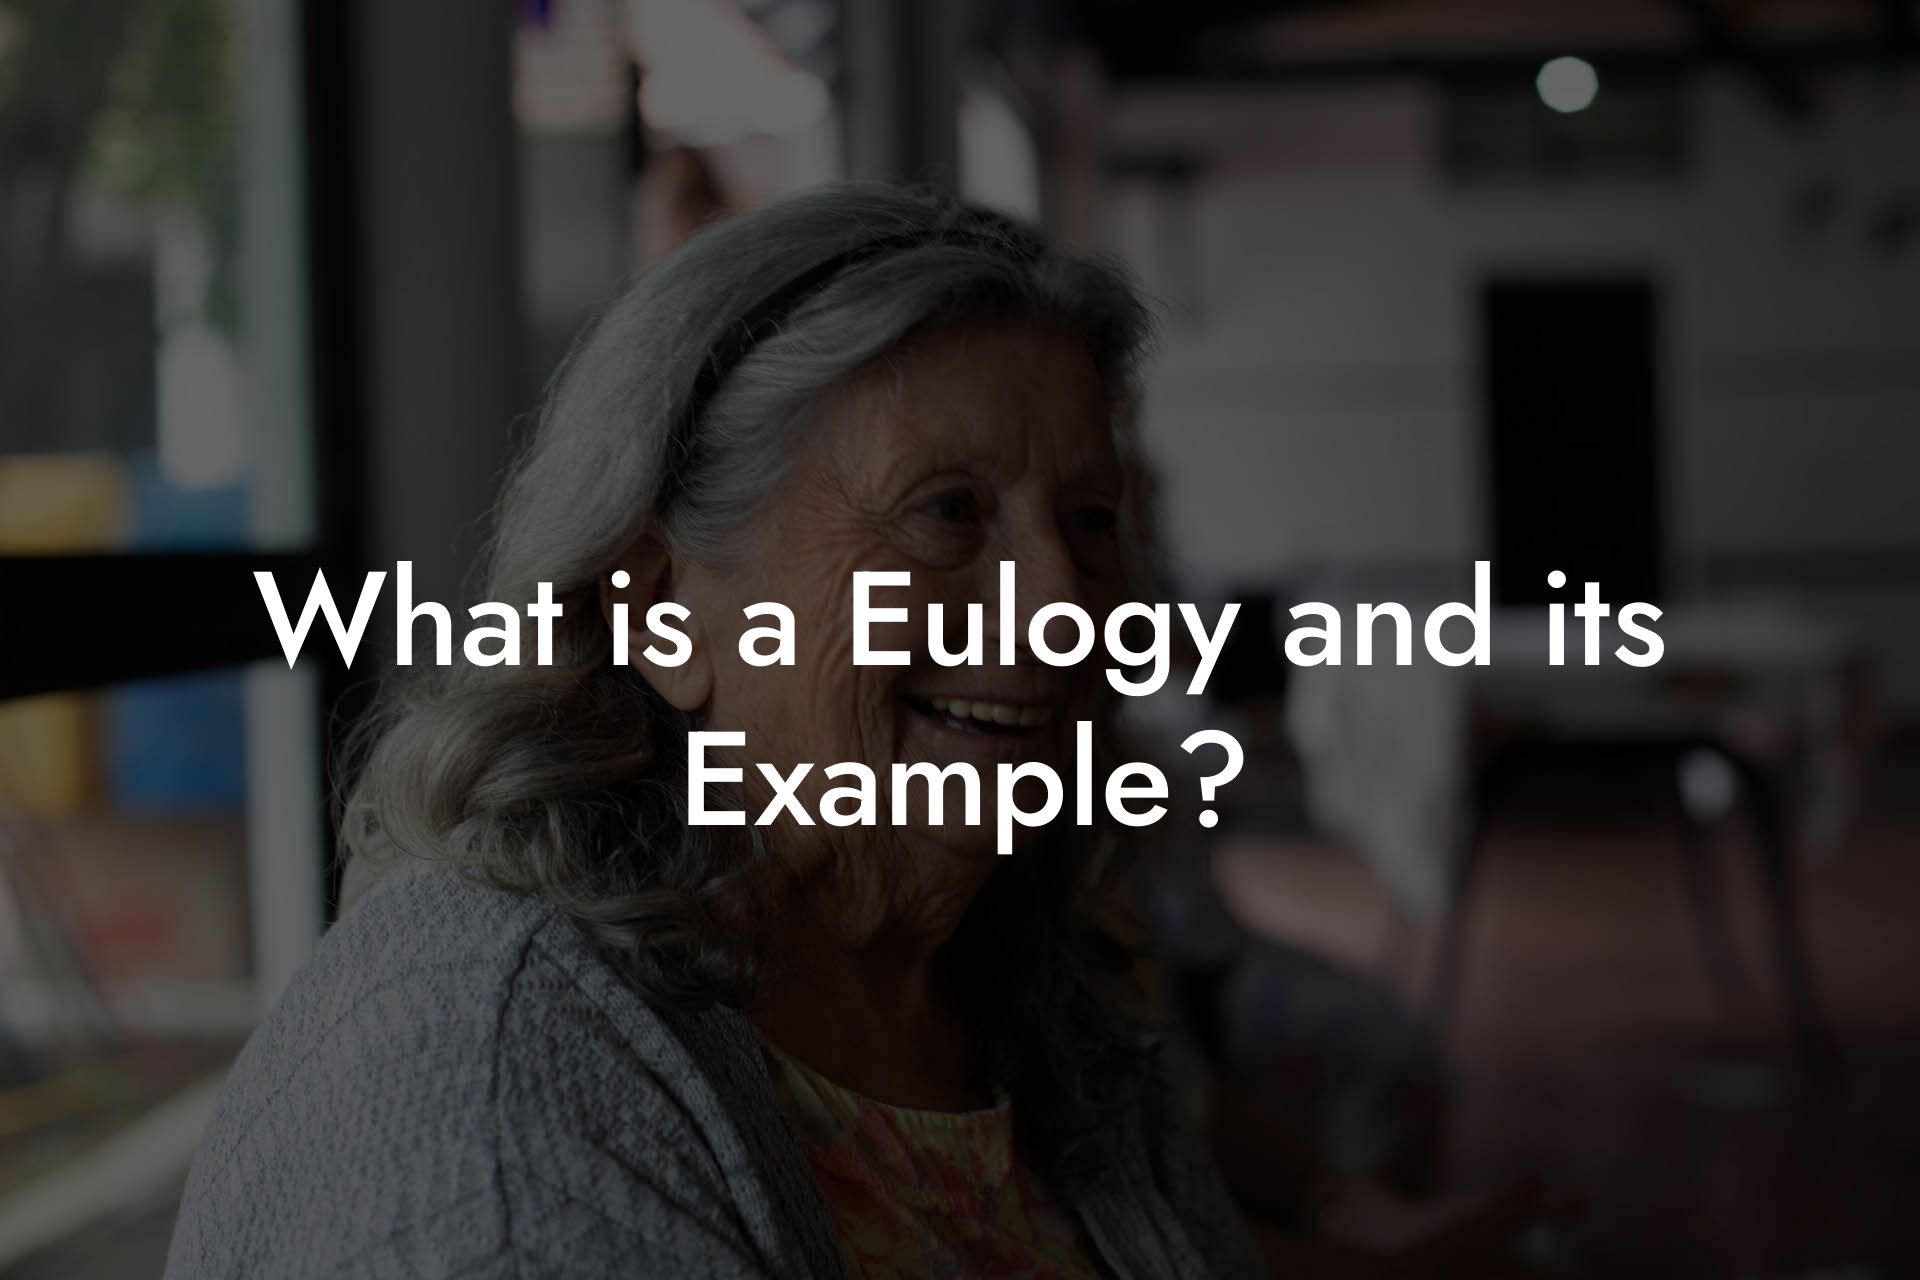 What is a Eulogy and its Example?